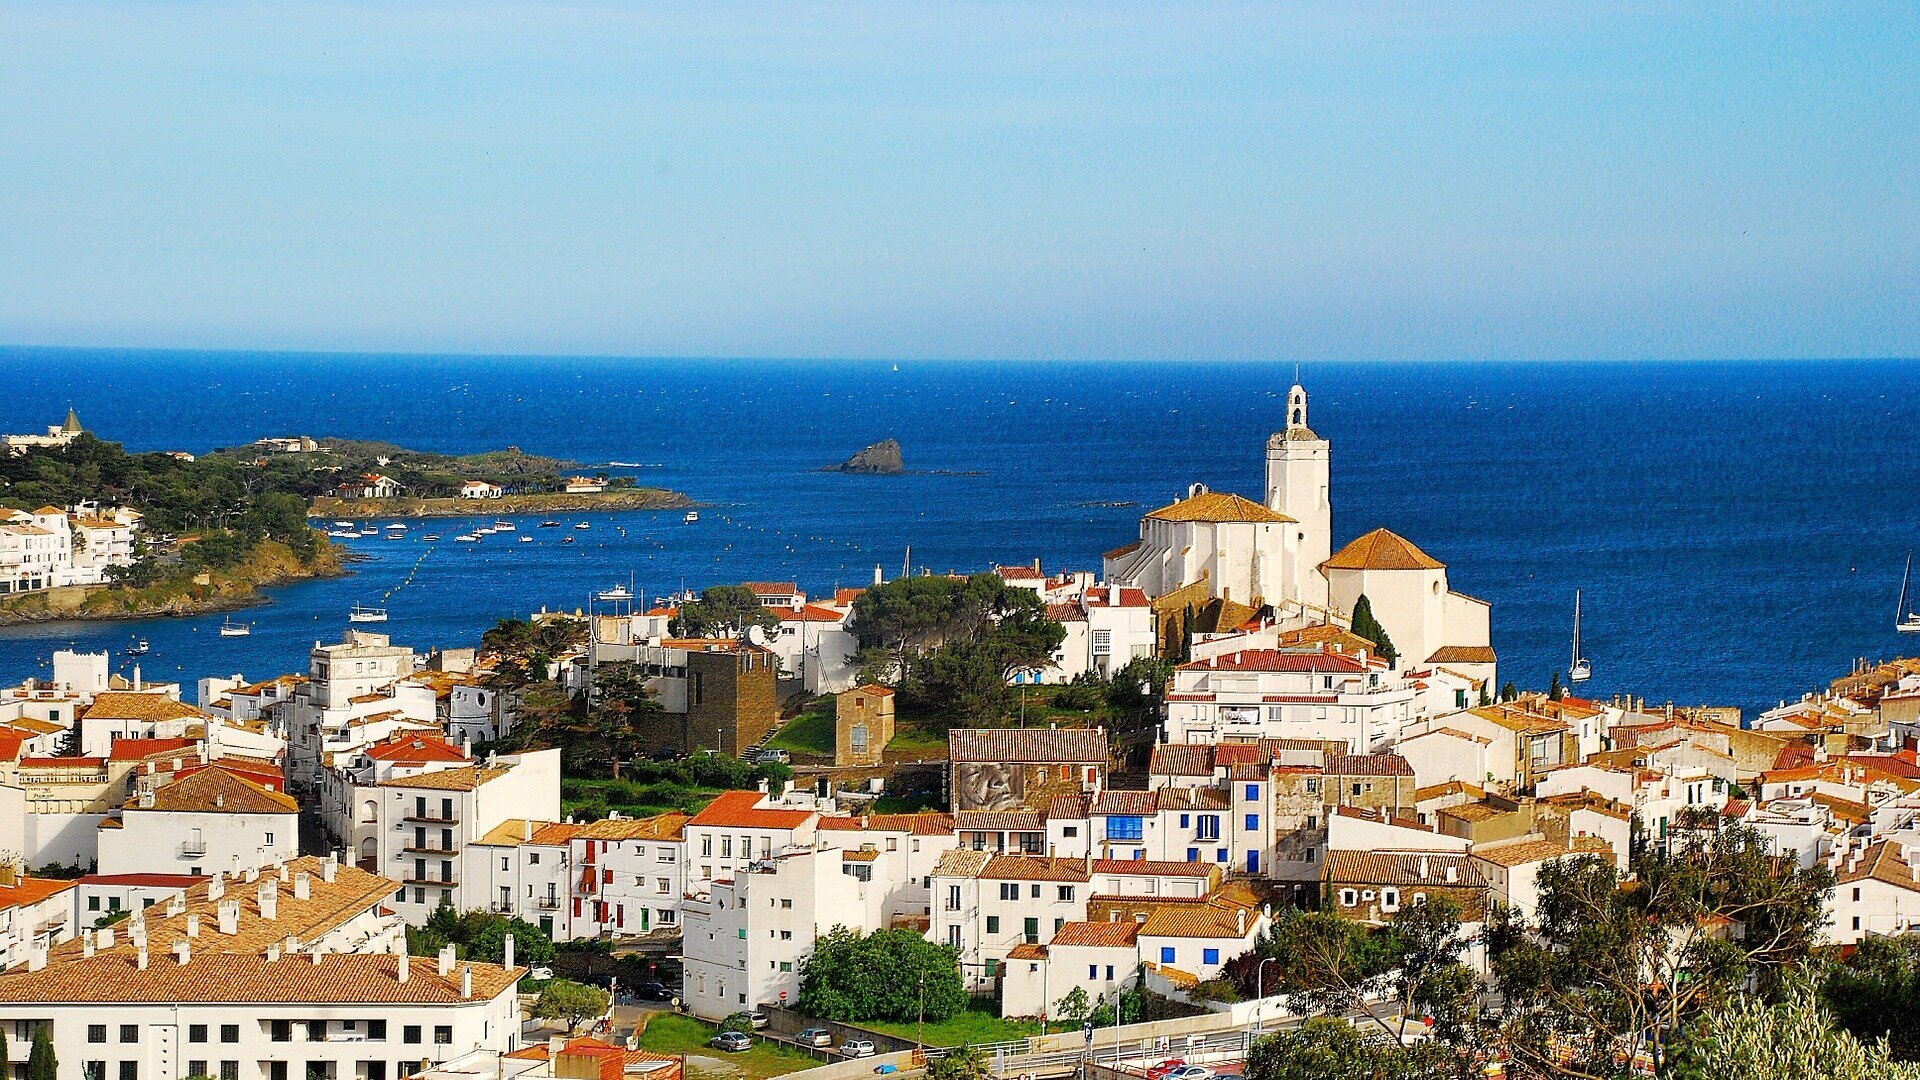 Discover the typical village of Cadaqués in Spain